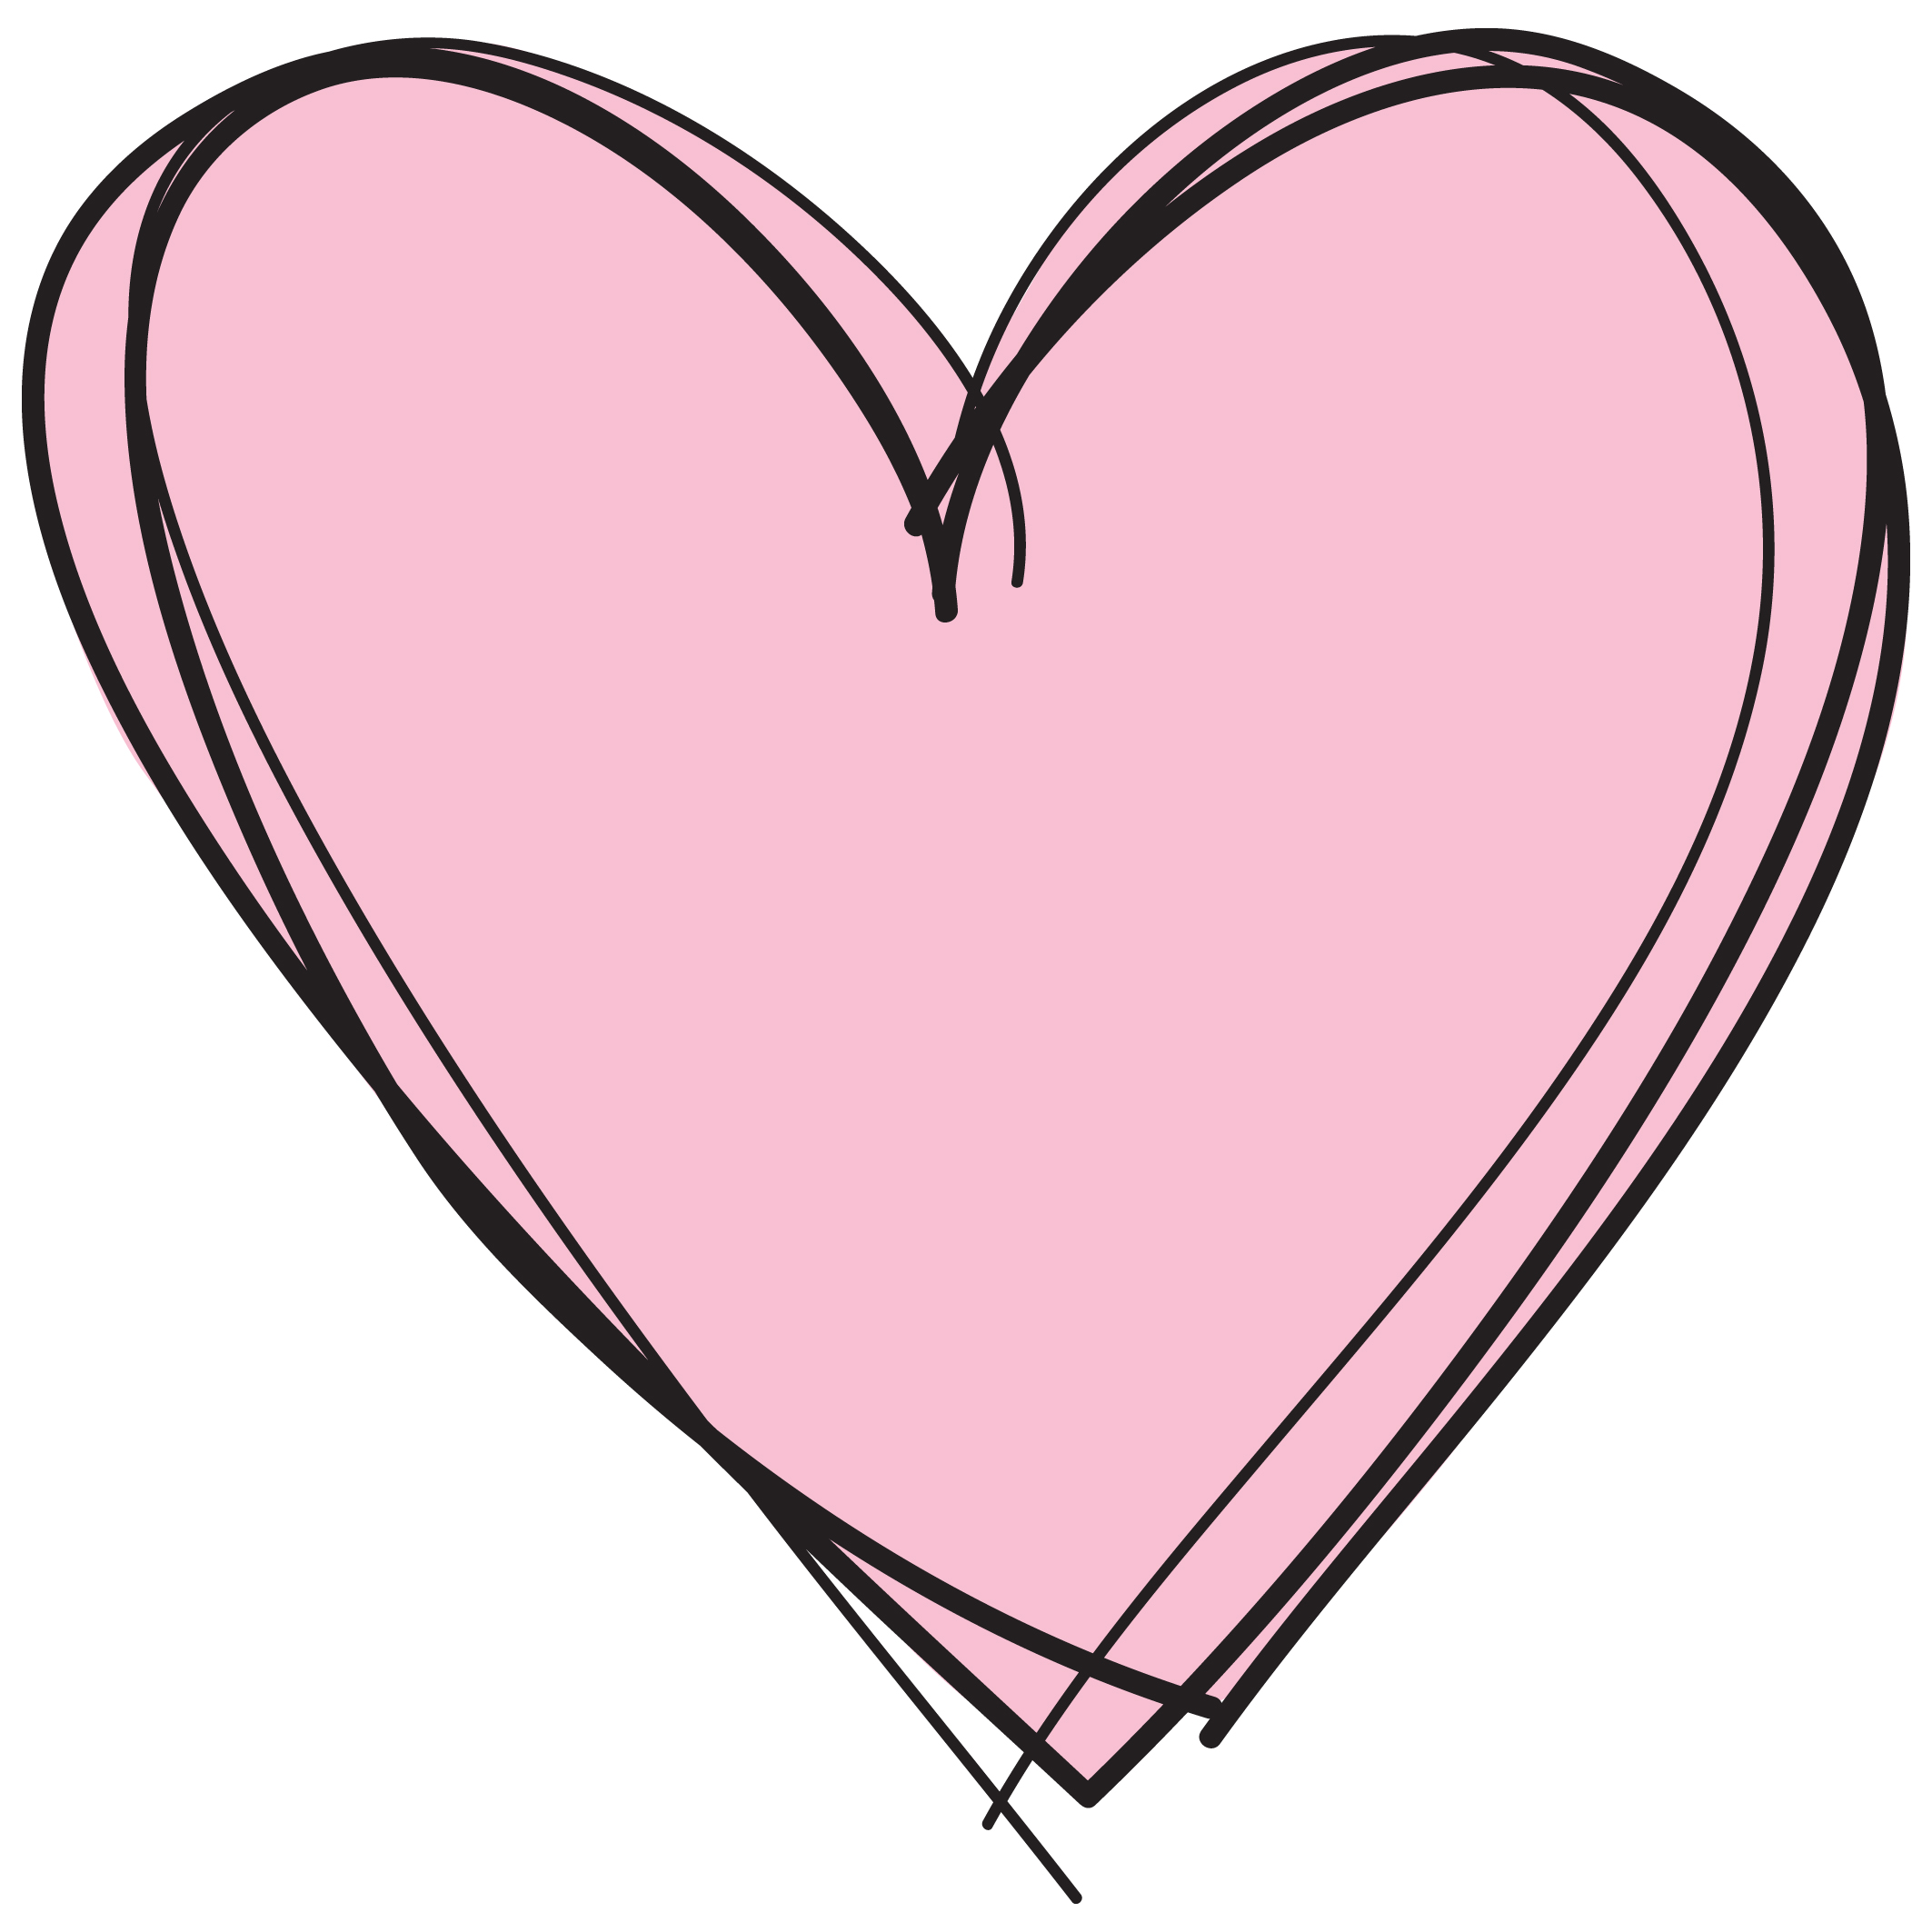 Pink Heart Outline Clipart   Clipart Panda   Free Clipart Images